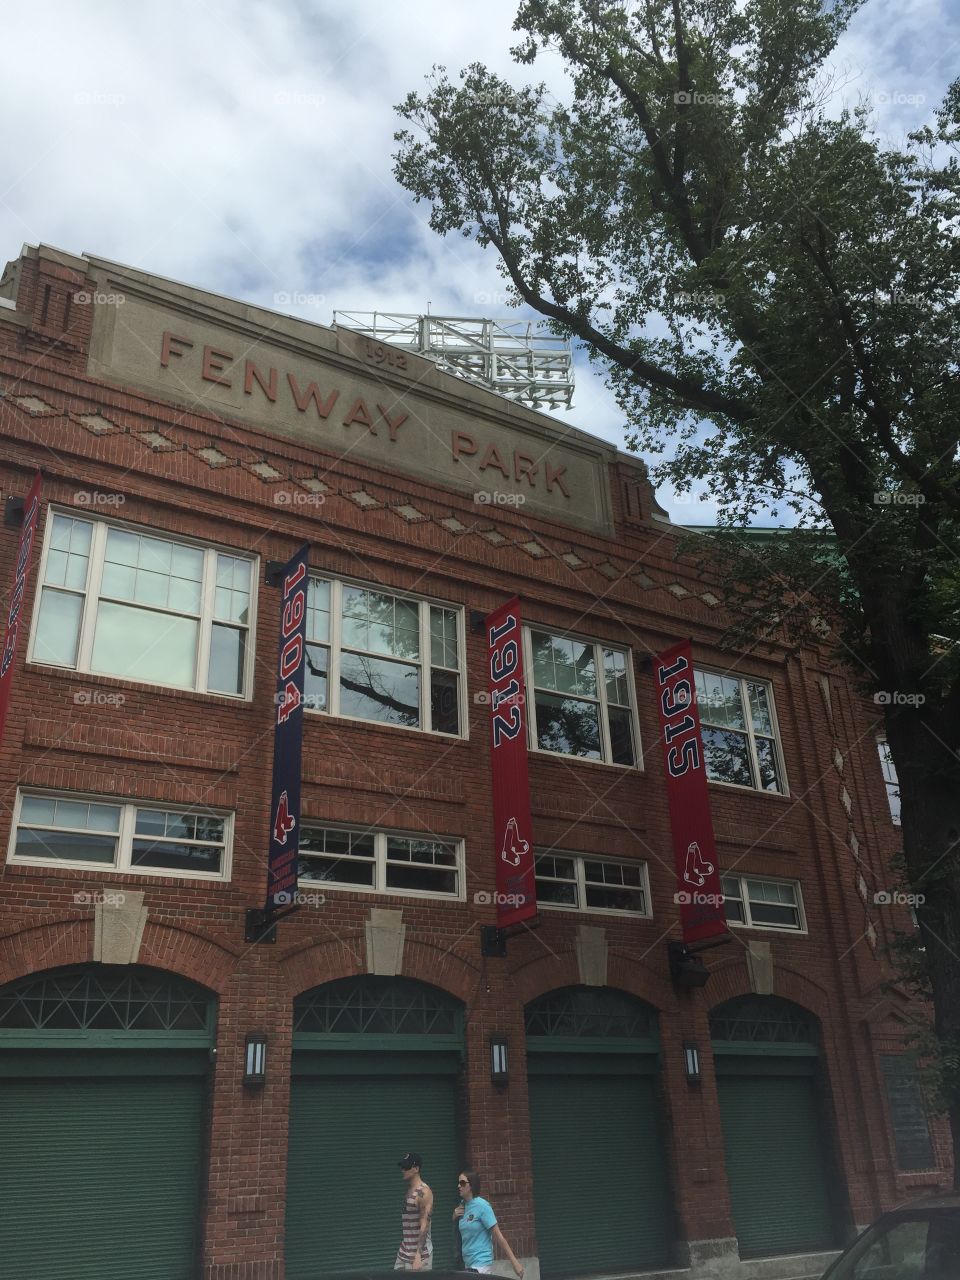 Fenway park. Home of the Red Sox baseball team in Boston.